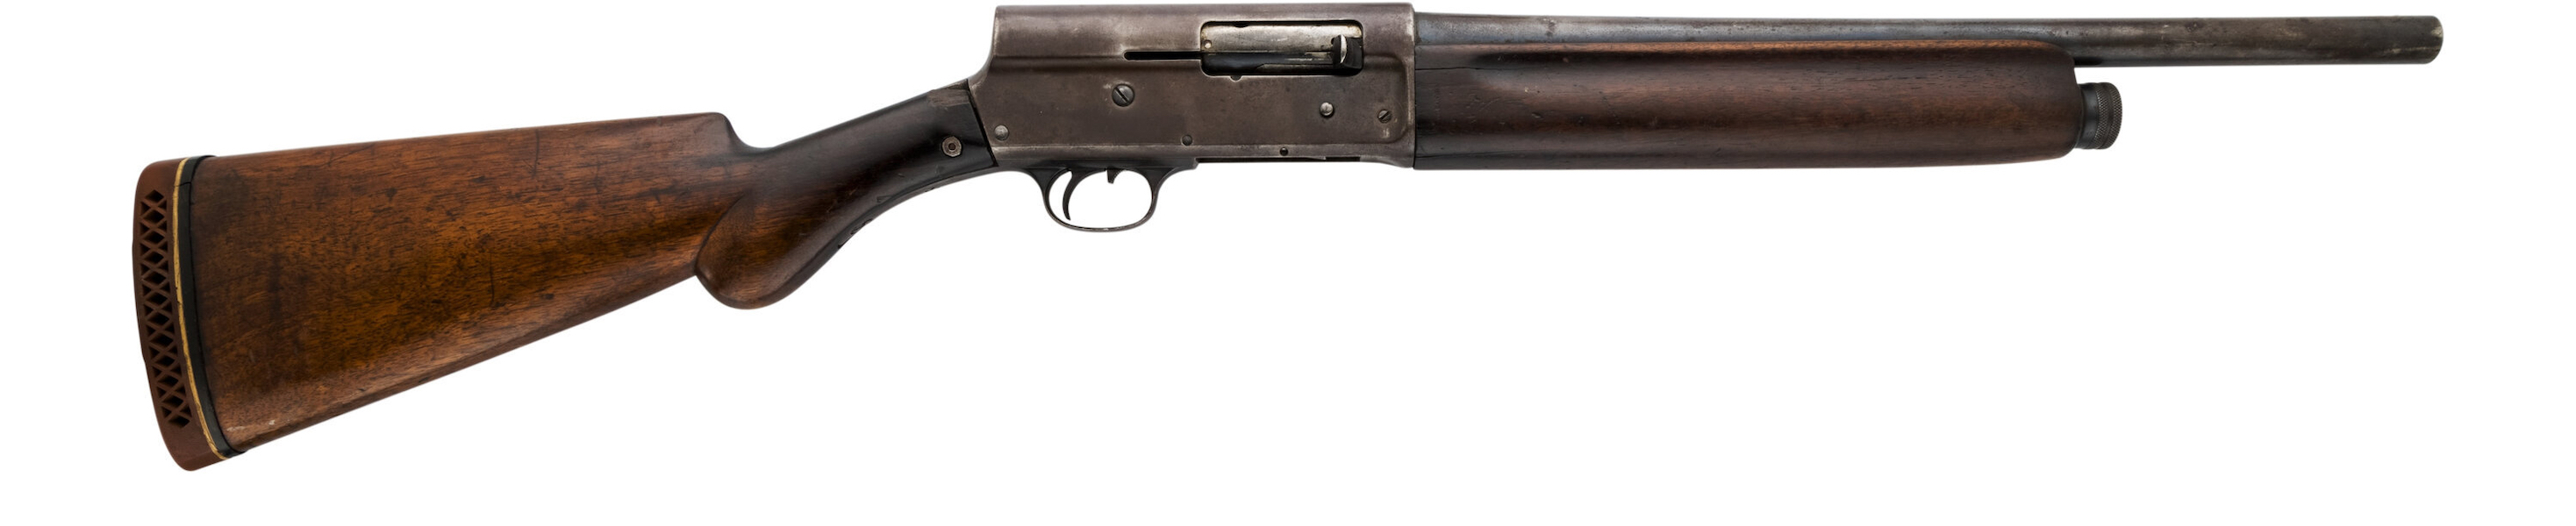 Remington Model 11 semi-automatic shotgun found in the car in which Bonnie Parker and Clyde Barrow were killed, estimated at $40,000-$60,000. Image courtesy of Heritage Auctions